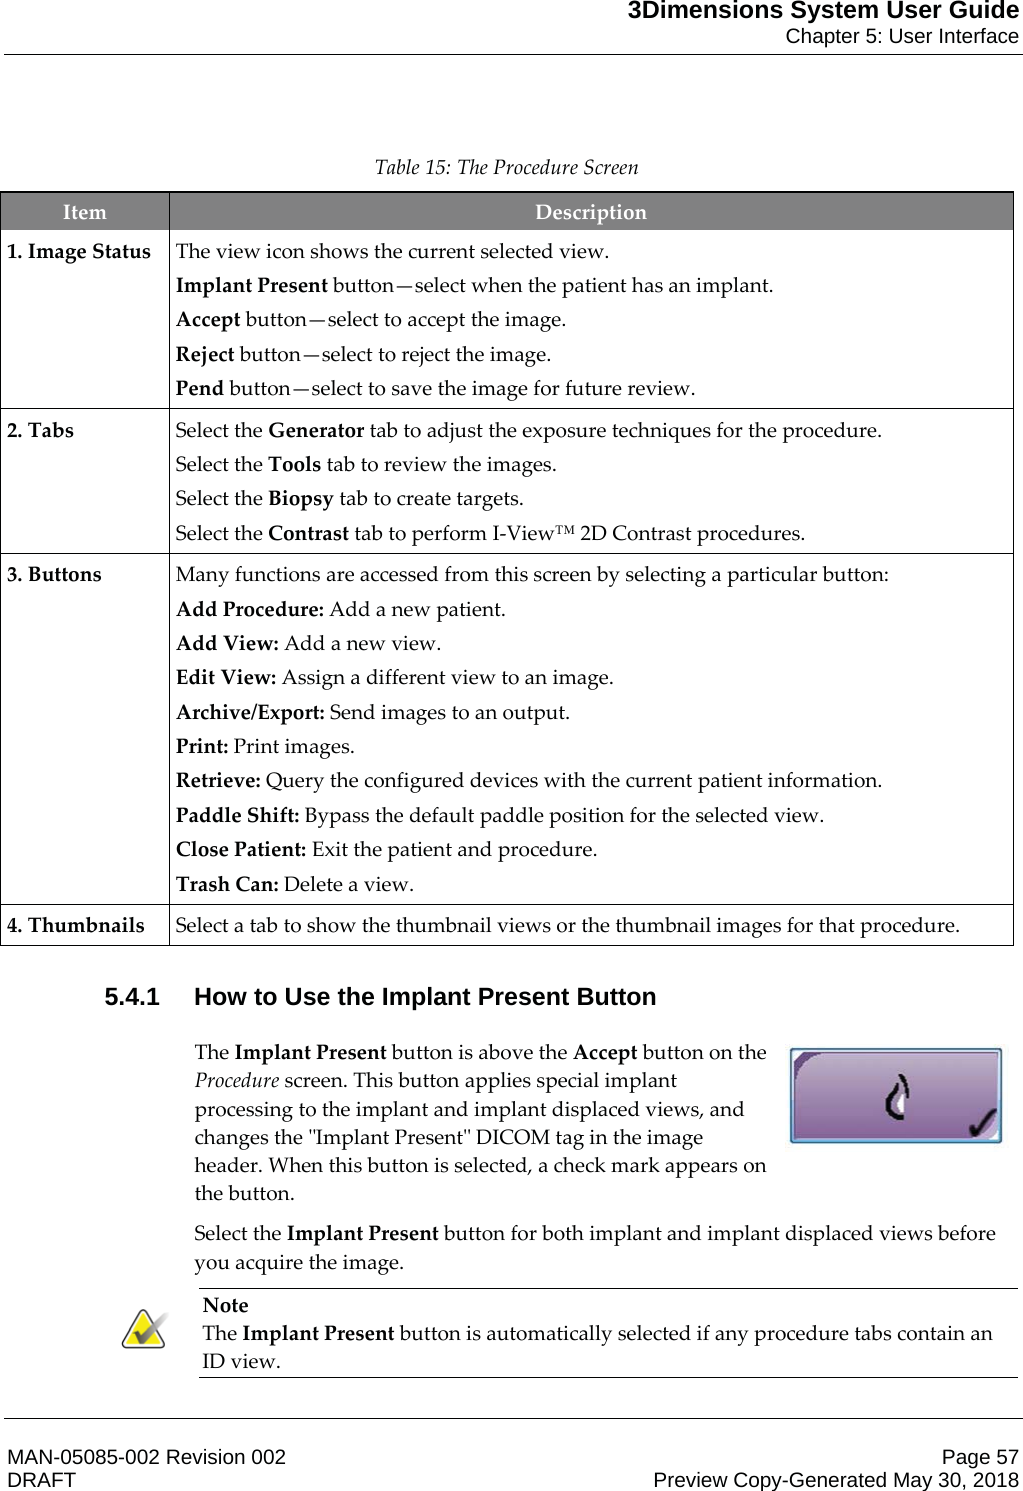 3Dimensions System User GuideChapter 5: User InterfaceMAN-05085-002 Revision 002 Page 57DRAFT Preview Copy-Generated May 30, 2018   Table 15: The Procedure Screen Item  Description 1. Image Status The view icon shows the current selected view. Implant Present button—select when the patient has an implant. Accept button—select to accept the image. Reject button—select to reject the image. Pend button—select to save the image for future review. 2. Tabs Select the Generator tab to adjust the exposure techniques for the procedure. Select the Tools tab to review the images. Select the Biopsy tab to create targets. Select the Contrast tab to perform I-View™ 2D Contrast procedures. 3. Buttons Many functions are accessed from this screen by selecting a particular button: Add Procedure: Add a new patient. Add View: Add a new view. Edit View: Assign a different view to an image. Archive/Export: Send images to an output. Print: Print images. Retrieve: Query the configured devices with the current patient information. Paddle Shift: Bypass the default paddle position for the selected view. Close Patient: Exit the patient and procedure. Trash Can: Delete a view. 4. Thumbnails Select a tab to show the thumbnail views or the thumbnail images for that procedure.    5.4.1 How to Use the Implant Present Button The Implant Present button is above the Accept button on the Procedure screen. This button applies special implant processing to the implant and implant displaced views, and changes the &quot;Implant Present&quot; DICOM tag in the image header. When this button is selected, a check mark appears on the button.  Select the Implant Present button for both implant and implant displaced views before you acquire the image. Note The Implant Present button is automatically selected if any procedure tabs contain an ID view.    